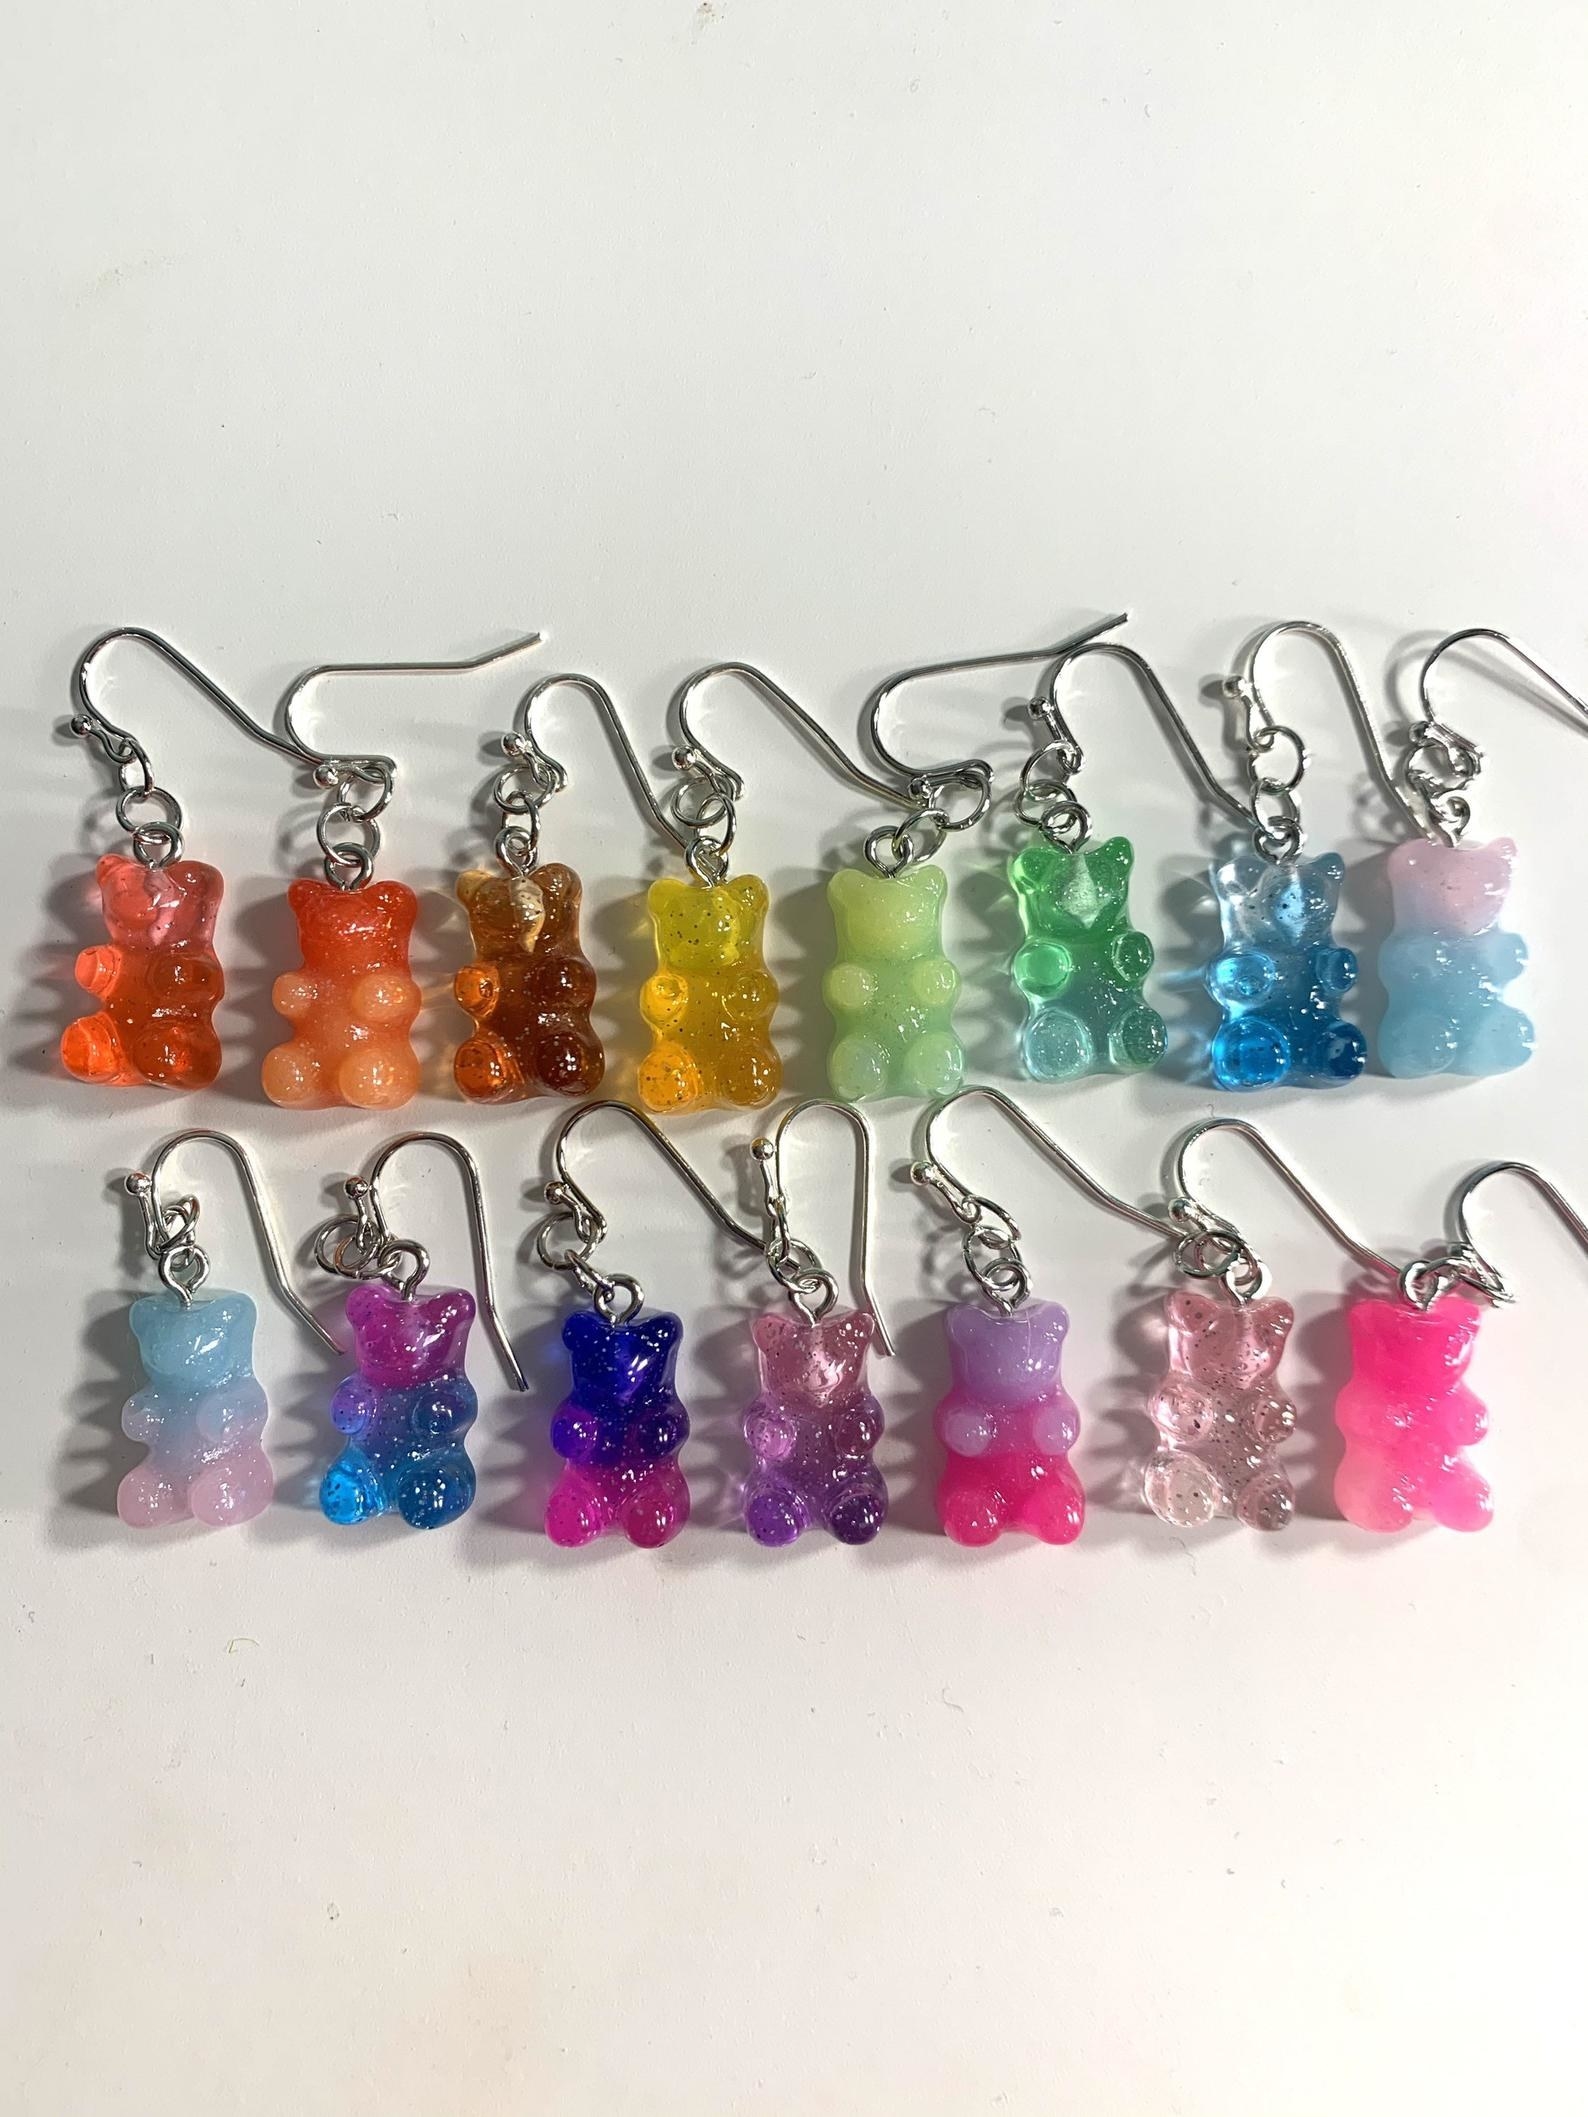 several earrings that are shaped like literal gummy bears in a variety of colors